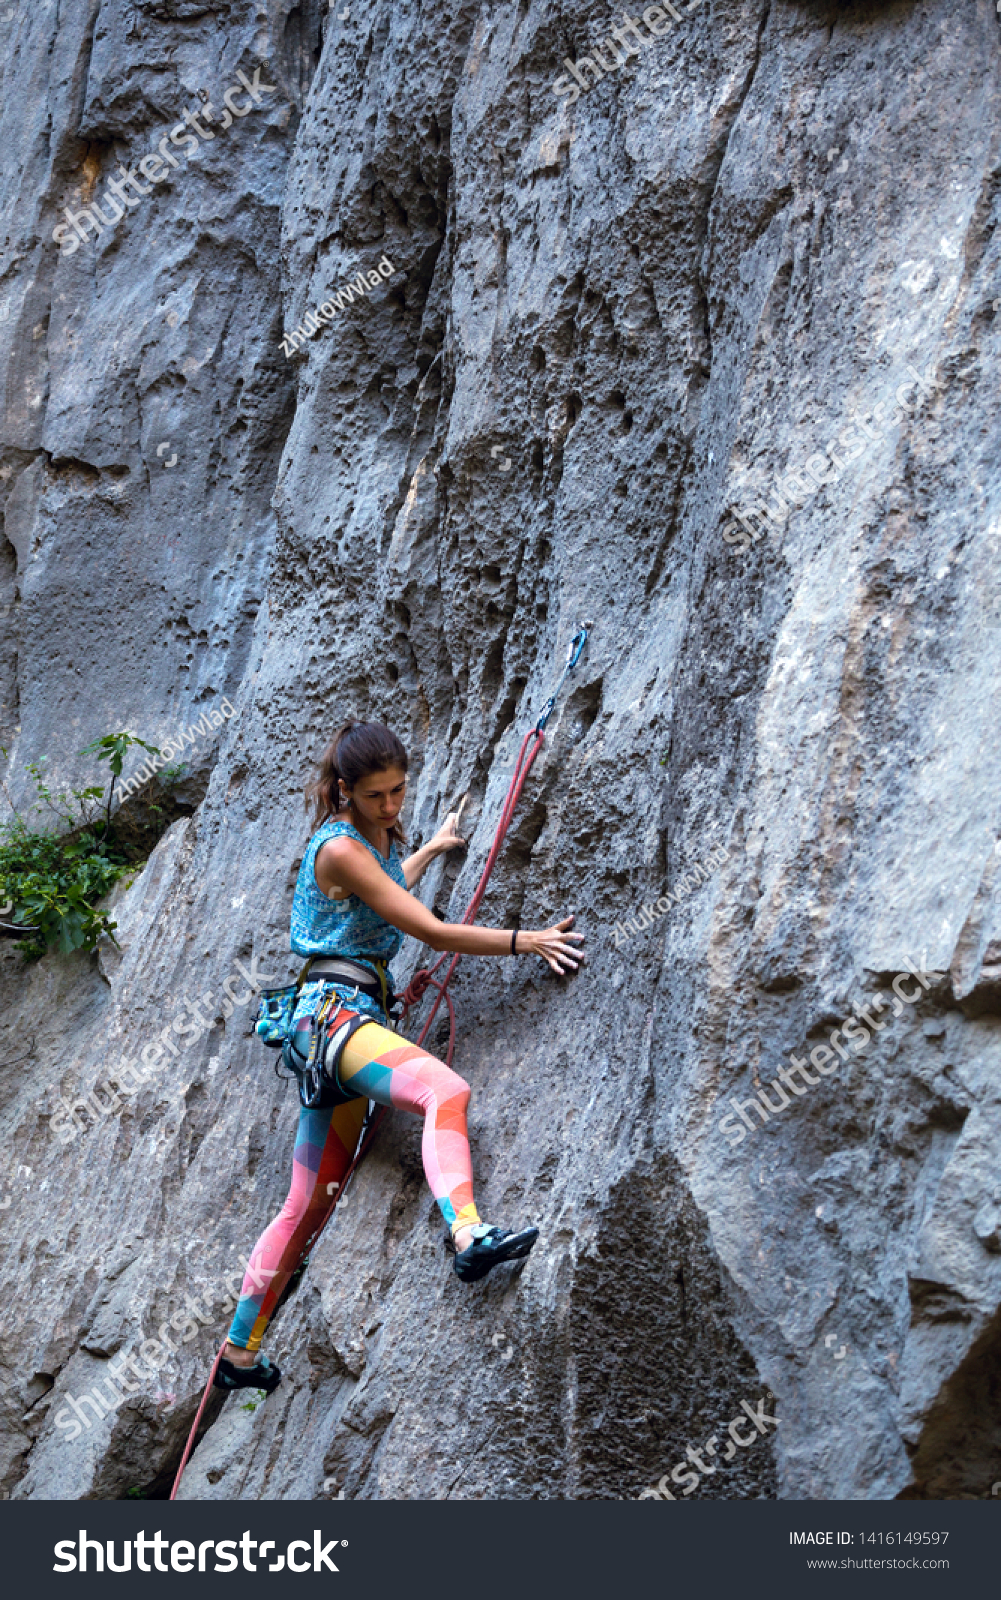 Climber overcomes challenging climbing route. A girl climbs a rock. Woman engaged in extreme sport. Extreme hobby. #1416149597